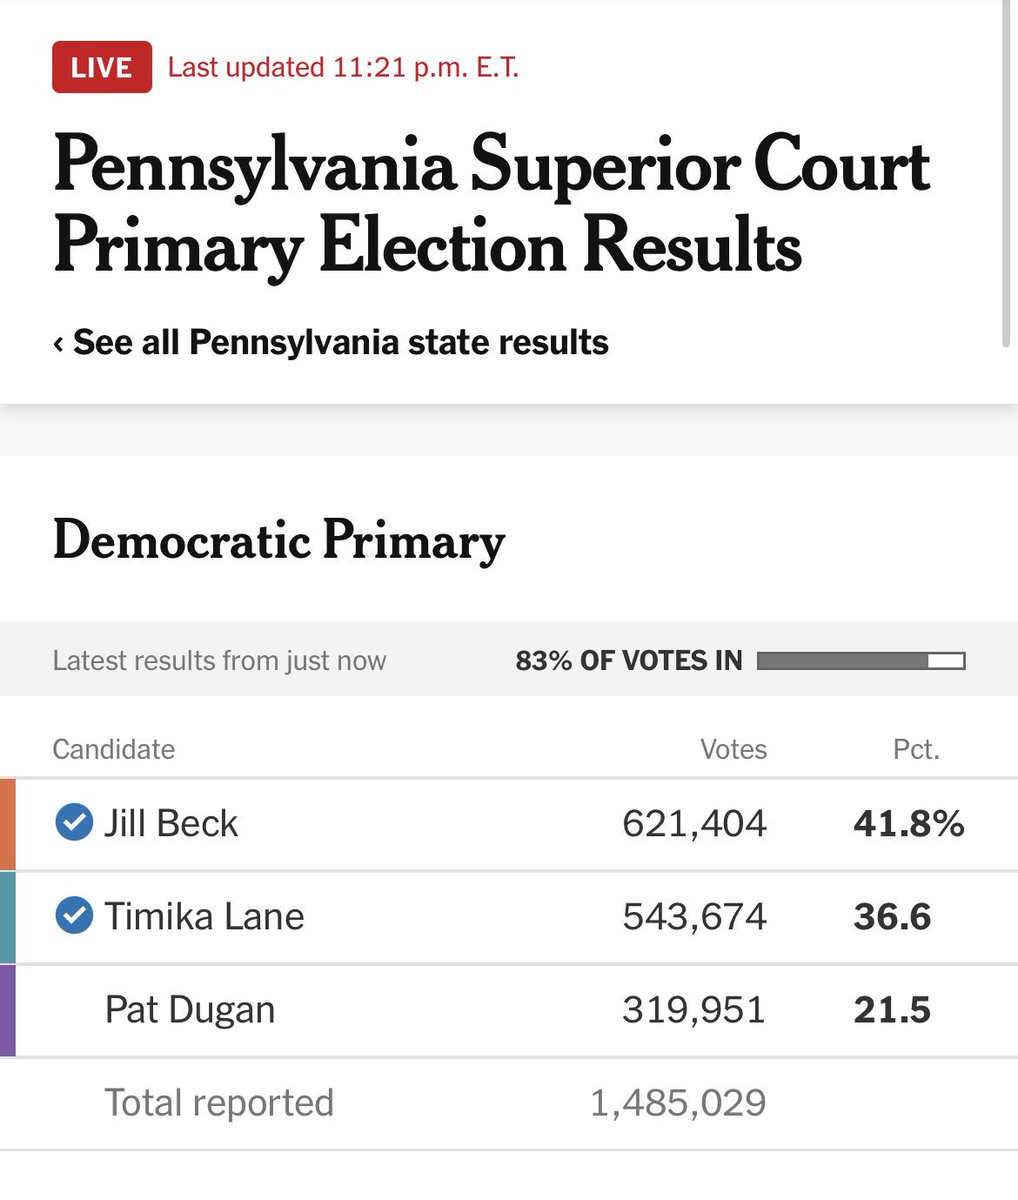 The primary results are in and I could not be more excited! Many thanks to everyone who helped me make this possible. Congratulations to @JudgeMcCaffery , @JudgeLaneForPA , & Matt Wolf on their victories. Time to rest up and head back #OnTheTrail. Let’s get out & win this thing!